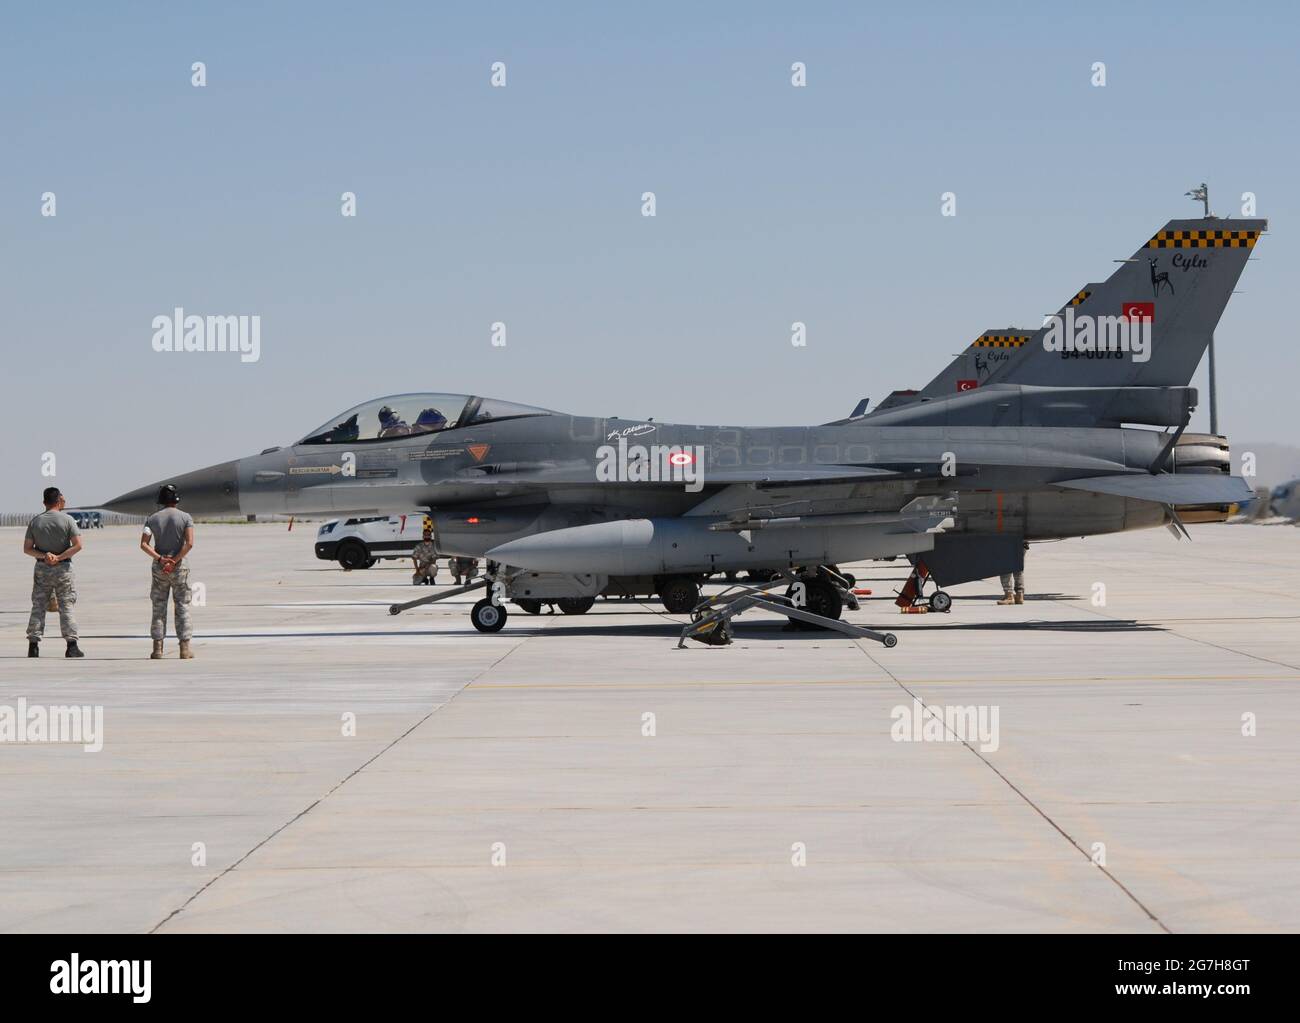 Anatolian Eagle Exercise held at the 3rd Main Jet Base in Konya. Warplanes waiting on the apron made flights throughout the day. Stock Photo